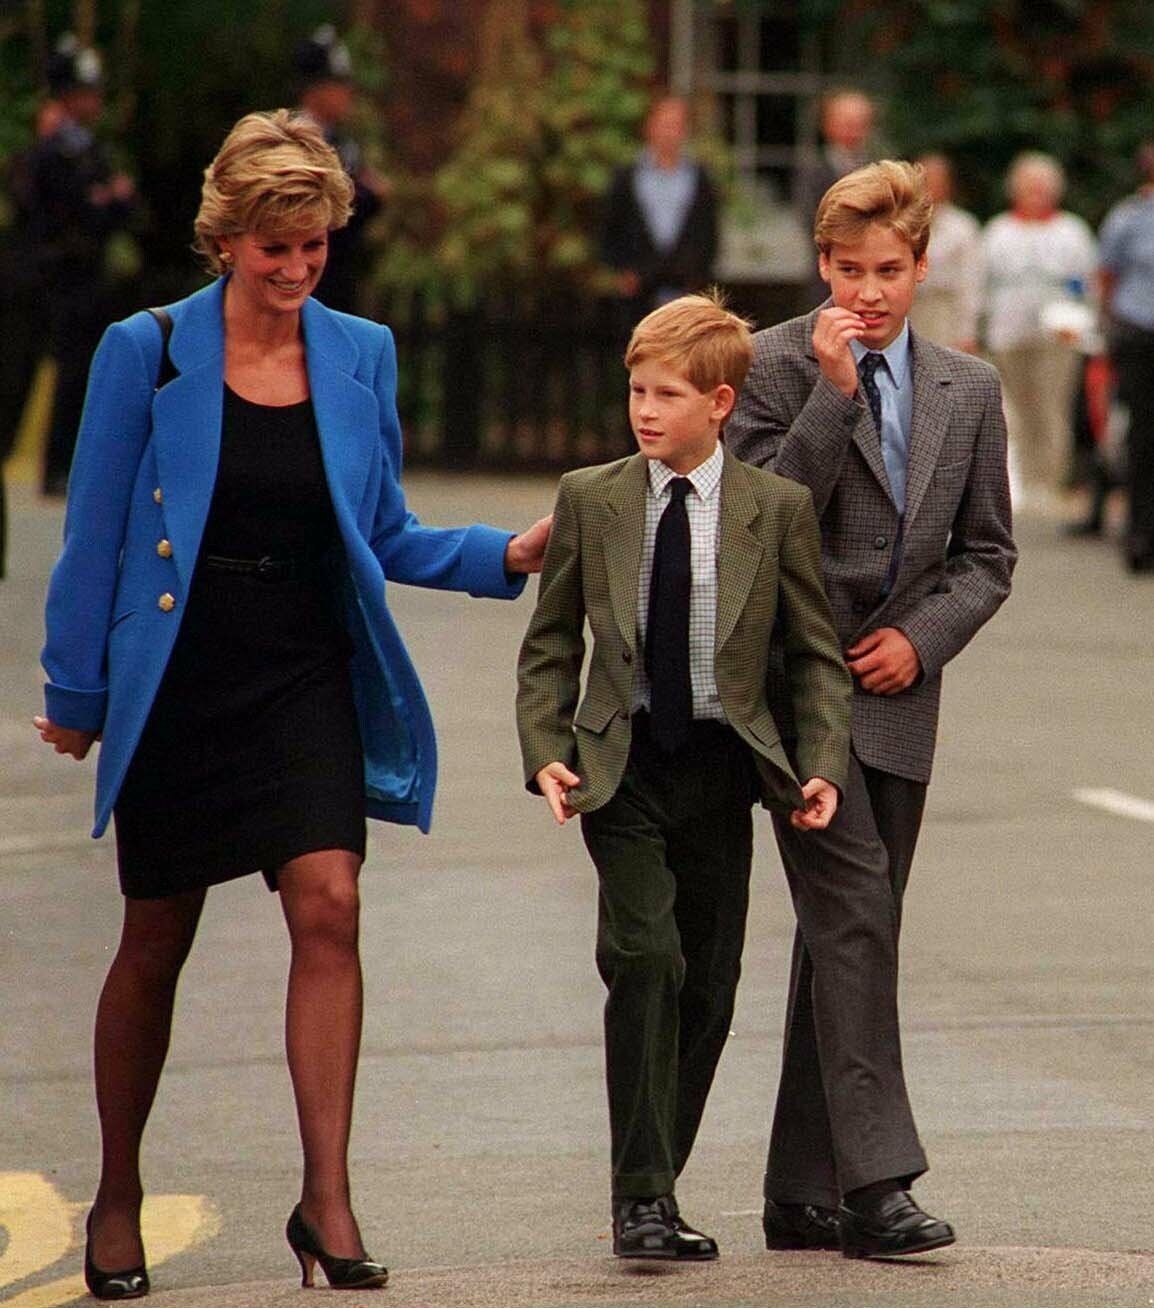 Prince William arriving with mother Diana, Princess of Wales and brother Prince Harry for his first day at Eton College on September 6, 1995 in Windsor, England. / Source: Getty Images